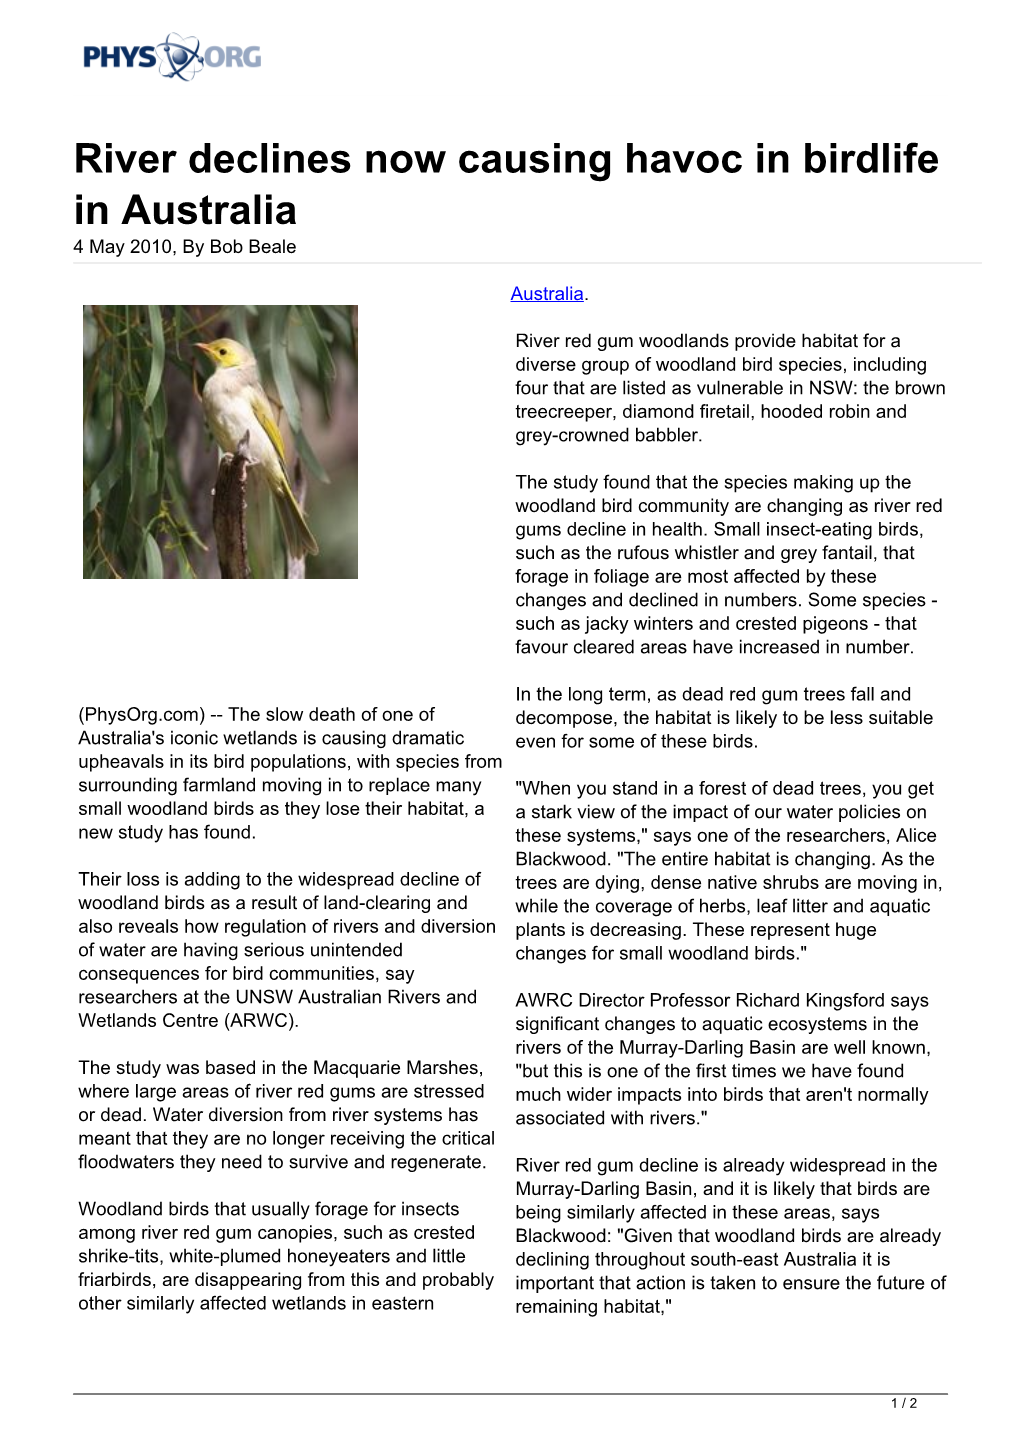 River Declines Now Causing Havoc in Birdlife in Australia 4 May 2010, by Bob Beale